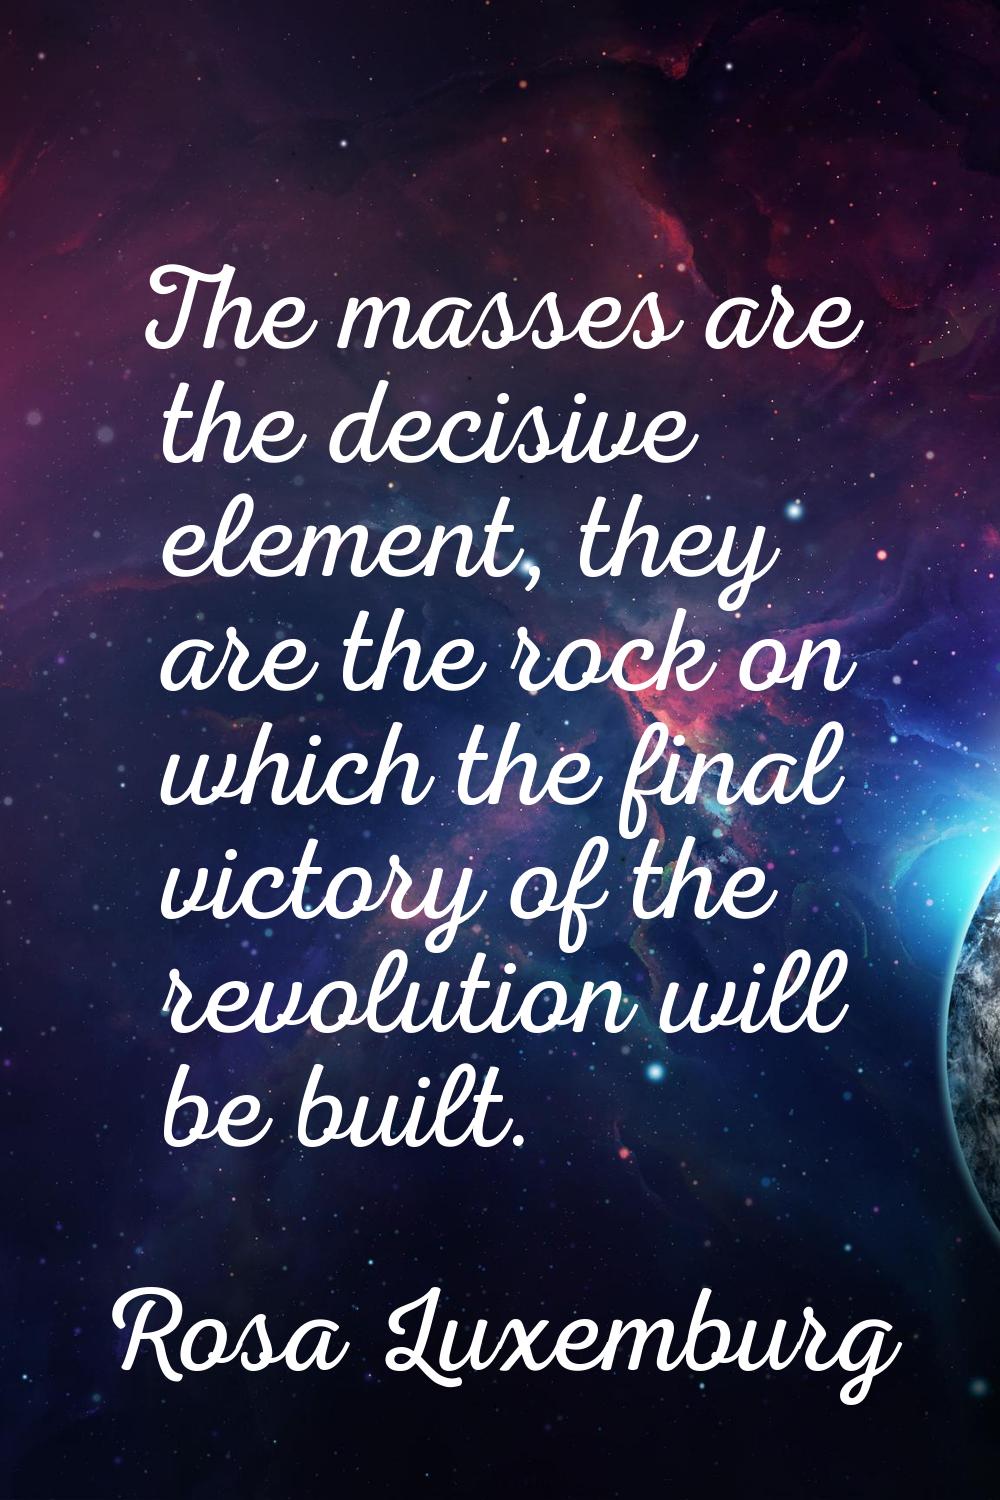 The masses are the decisive element, they are the rock on which the final victory of the revolution